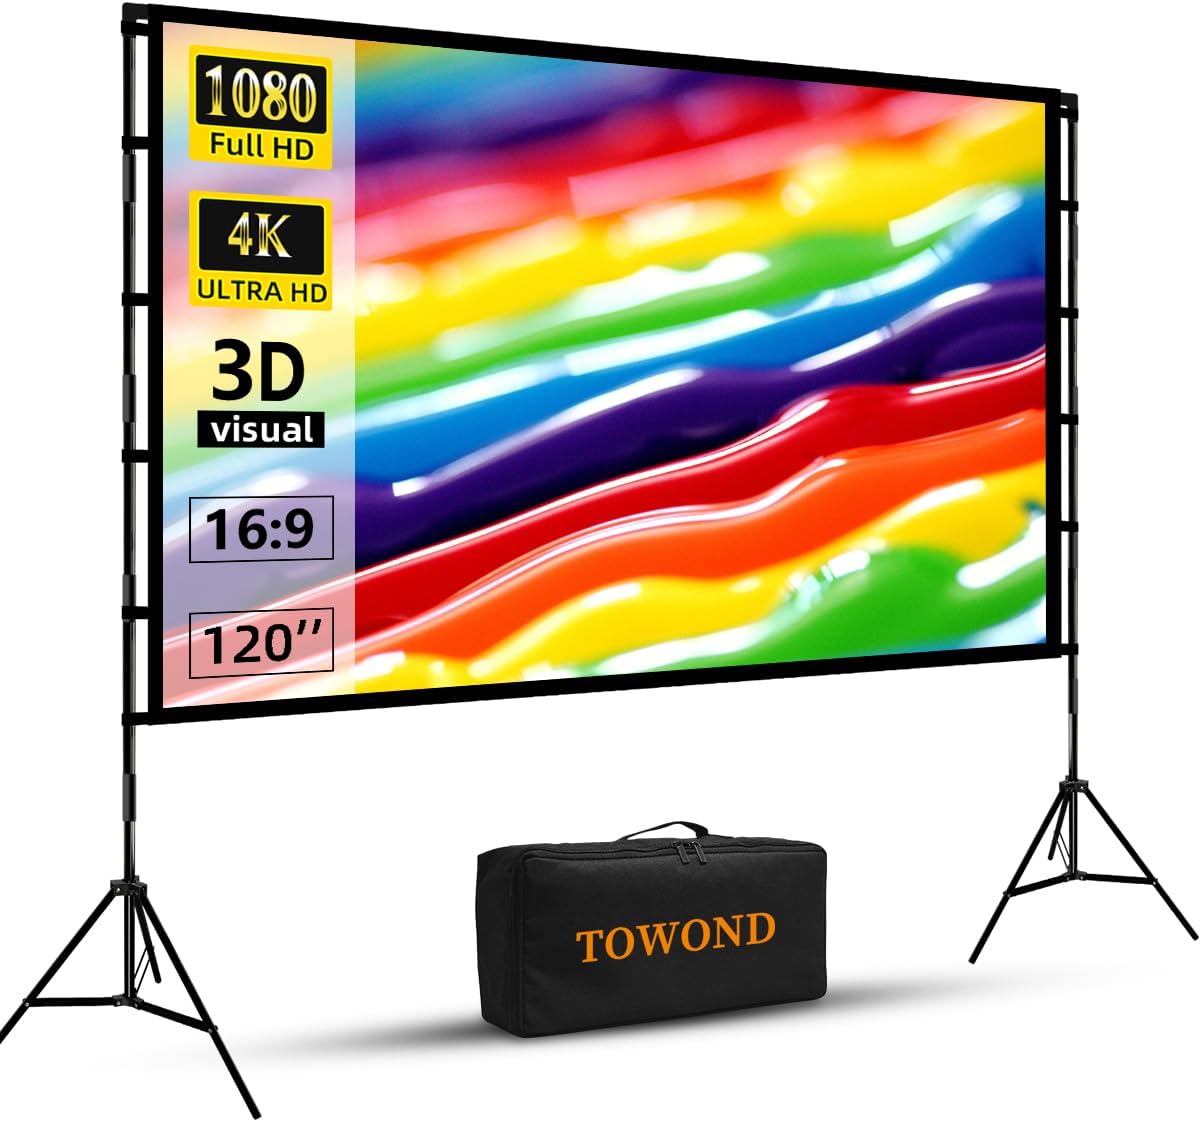 Towond Projector Screen and Stand,120 inch Portable Indoor Outdoor Projector Screen 16:9 4K HD Wrinkle-Free Lightweight Screen with Carry Bag for Backyard Movie Night